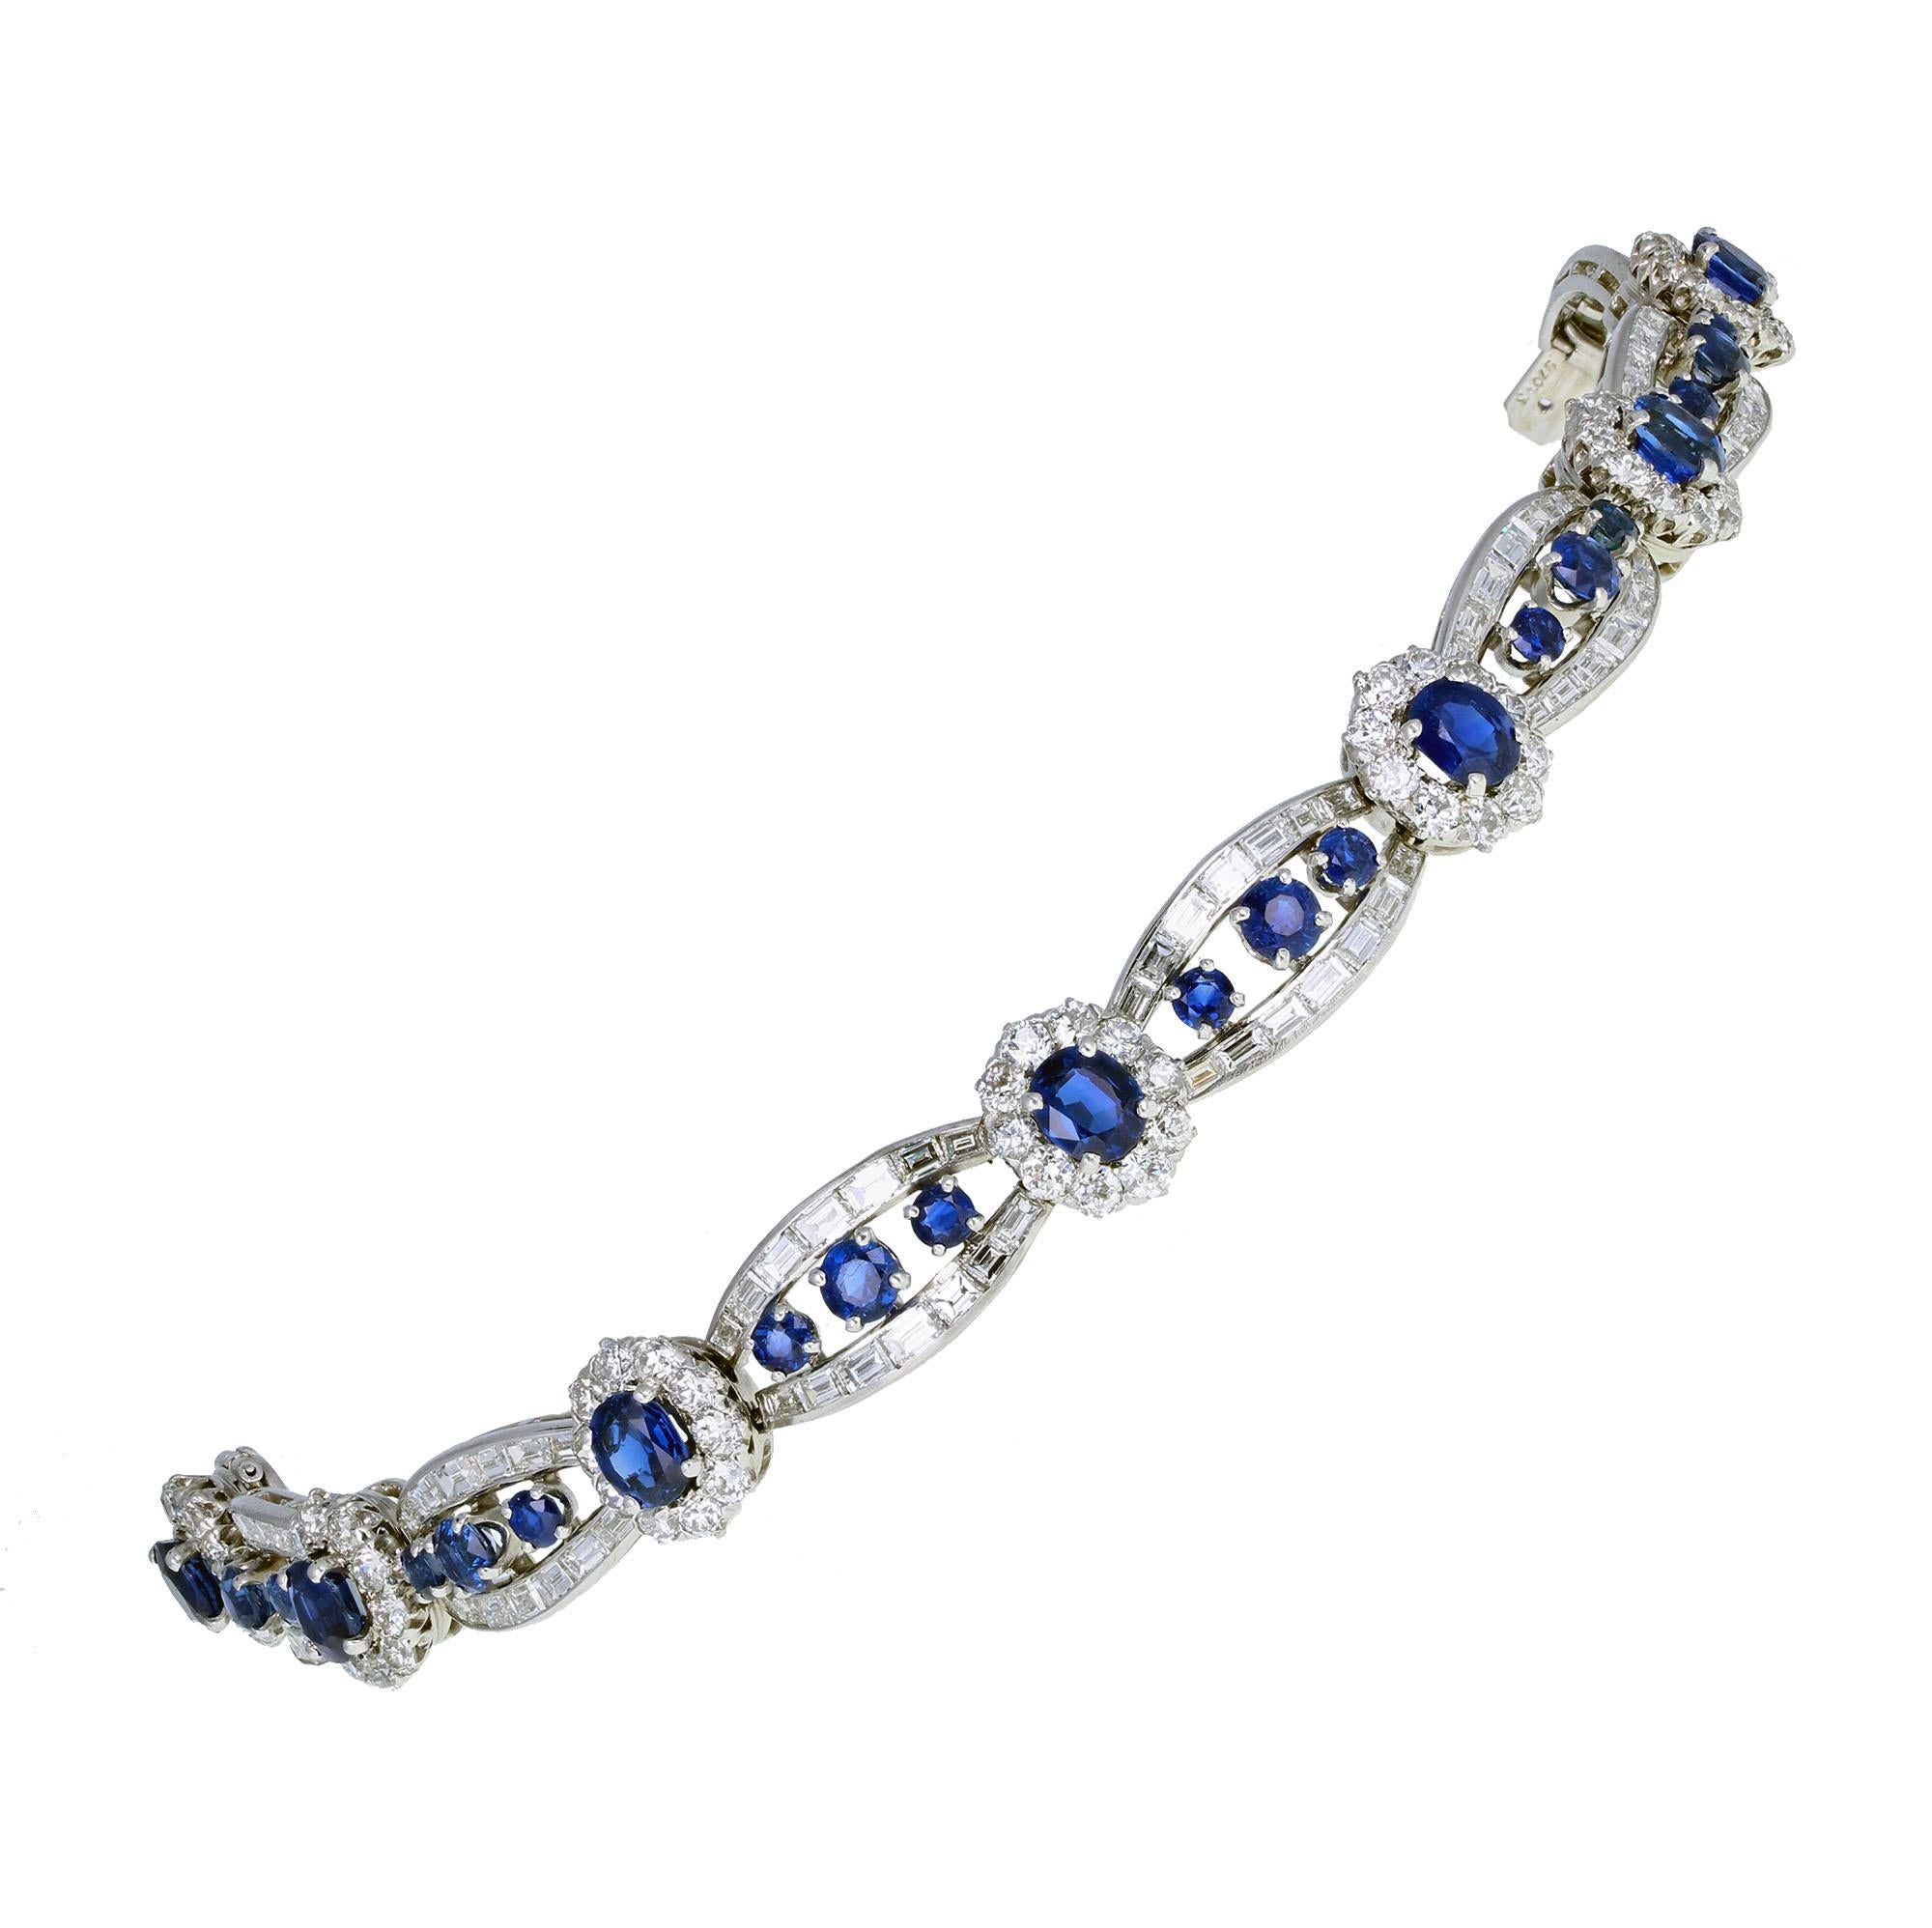 An exquisite platinum sapphire and diamond bracelet from the 1920s from the famed house of Cartier. Seven oval sapphire and diamond clusters, joined with a double row of channel-set, baguette-cut diamonds and three round-cut sapphires. A beautiful,